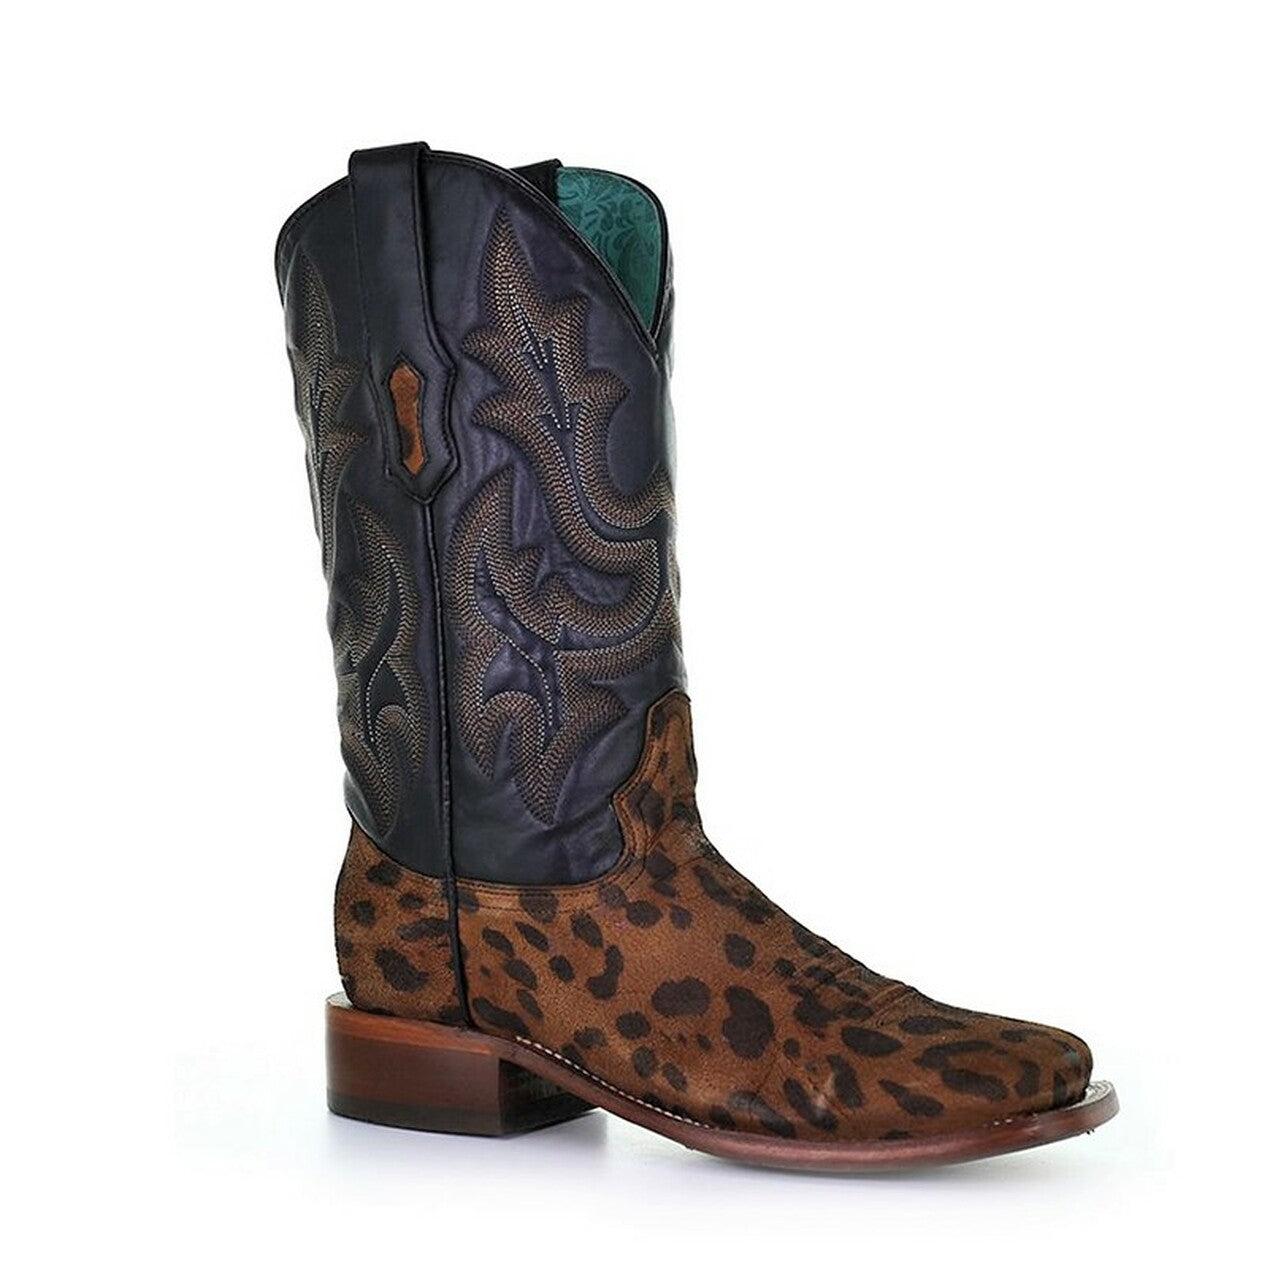 A4144 - Corral camel leopard western roper leather boots for women-Kuet.us